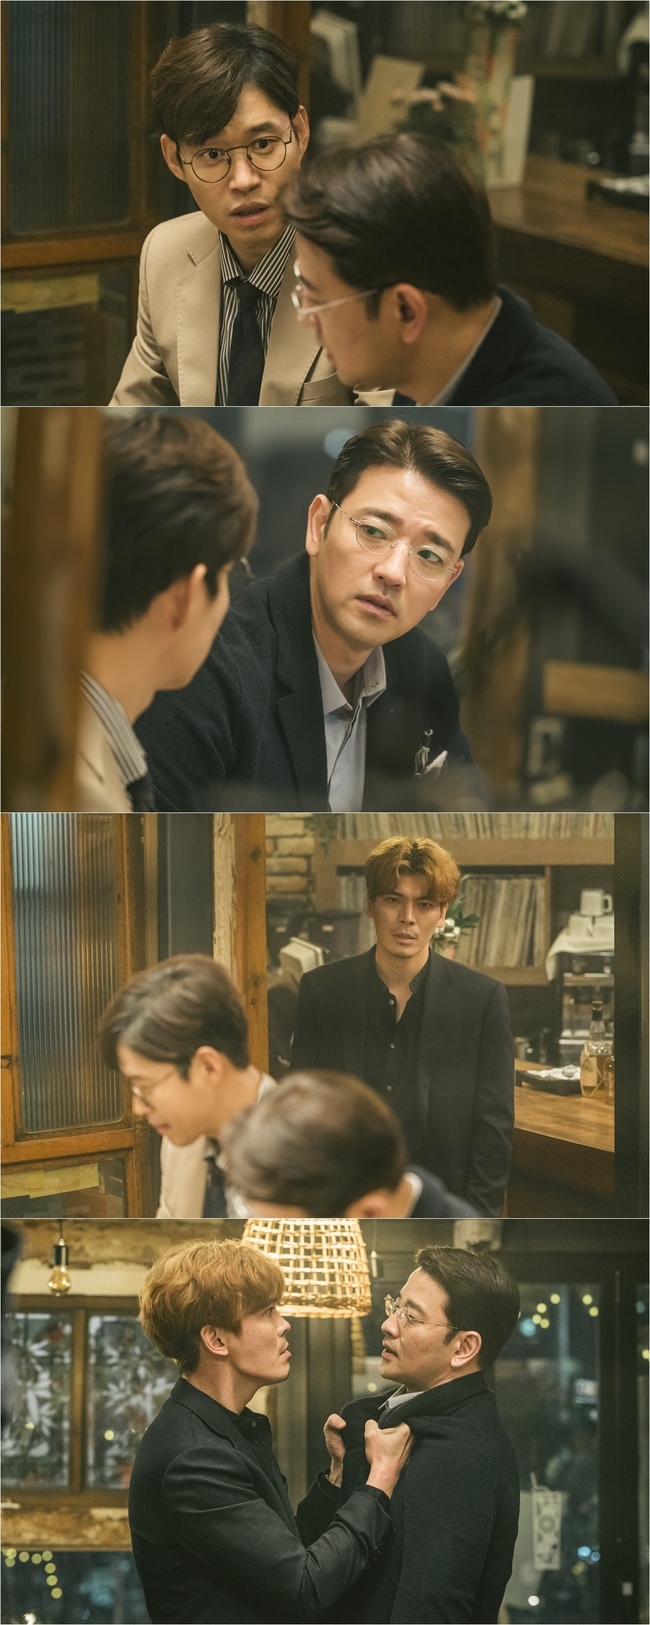 A crack breaks up in the friendship of Bae Soo-bin, Kim Sung-oh.JTBC gilt drama Elegant Friends (playwright Park Hyo-yeon, Kim Kyung-sun/director Song Hyun-wook, Park So-yeon) unveiled a still cut containing the sparkling nerves of Jung Jae-hoon (Bae Soo-bin) and Cho Hyung-woo (Kim Sung-oh).In the last broadcast, the shadow of the question that caused the cracks to Angungcheol (Yoo Jun-sang) and Nam Jeong-hae (Song Yoon-a) revealed and amplified the curiosity.Ahn Gong-cheols suspicions of facing the secret of his wife, which he had never known before, deepened.In addition, Baek Hae-sook (Hae-gam-bun) and Phoenix four-man, who opened the door of Hwayang Yeonhwa, Nam Jeong-hae, Kang Kyung-ja (Kim Hye-eun) and Yoo Eun-sil (Lee In-hye) appeared in surprise and raised tension.In the public photos, there are pictures of Angungcheol, Jung Jae-hoon, and Cho Hyung-woo in an unusual atmosphere.Jung Jae-hoon, who was usually cold and hard, spoke carefully unlike before, and the appearance of the Rippa Ahn Gung-cheol, who looks surprised, focuses attention.Cho Hyung-woos smiley face, which happened to hear the conversation between the two people, stimulates curiosity.In the ensuing photo, the angry eyes of Cho Hyung-woo, who caught the neck of Jung Jae-hoon, heighten tension.The situation revealed in the past, when Cho Hyung-woo, who resents his wife for drinking and saying, This is what my life looks like, because of you, Kang Kyung-ja, who went to meet with the head of the film company, Park Si-o (Kim Kwang-gyu), and Jung Jae-hoon, who witnessed the meeting between Park and Kang Kyung-ja in the hotel lobby.Indeed, it raises the question of what Jung Jae-hoons decisive word, which has shaken the steam friendship of 20 years, was.In the 9th broadcast on the 7th, while Ahn Jung-cheol and Nam Jung-hae are raising suspicion and distrust of each other, Jung Jae-hoon and Baek Hae-sooks unhealed wounds deepen.The emotional changes that are swirling in the intertwined relationships of four people will be drawn in depth.